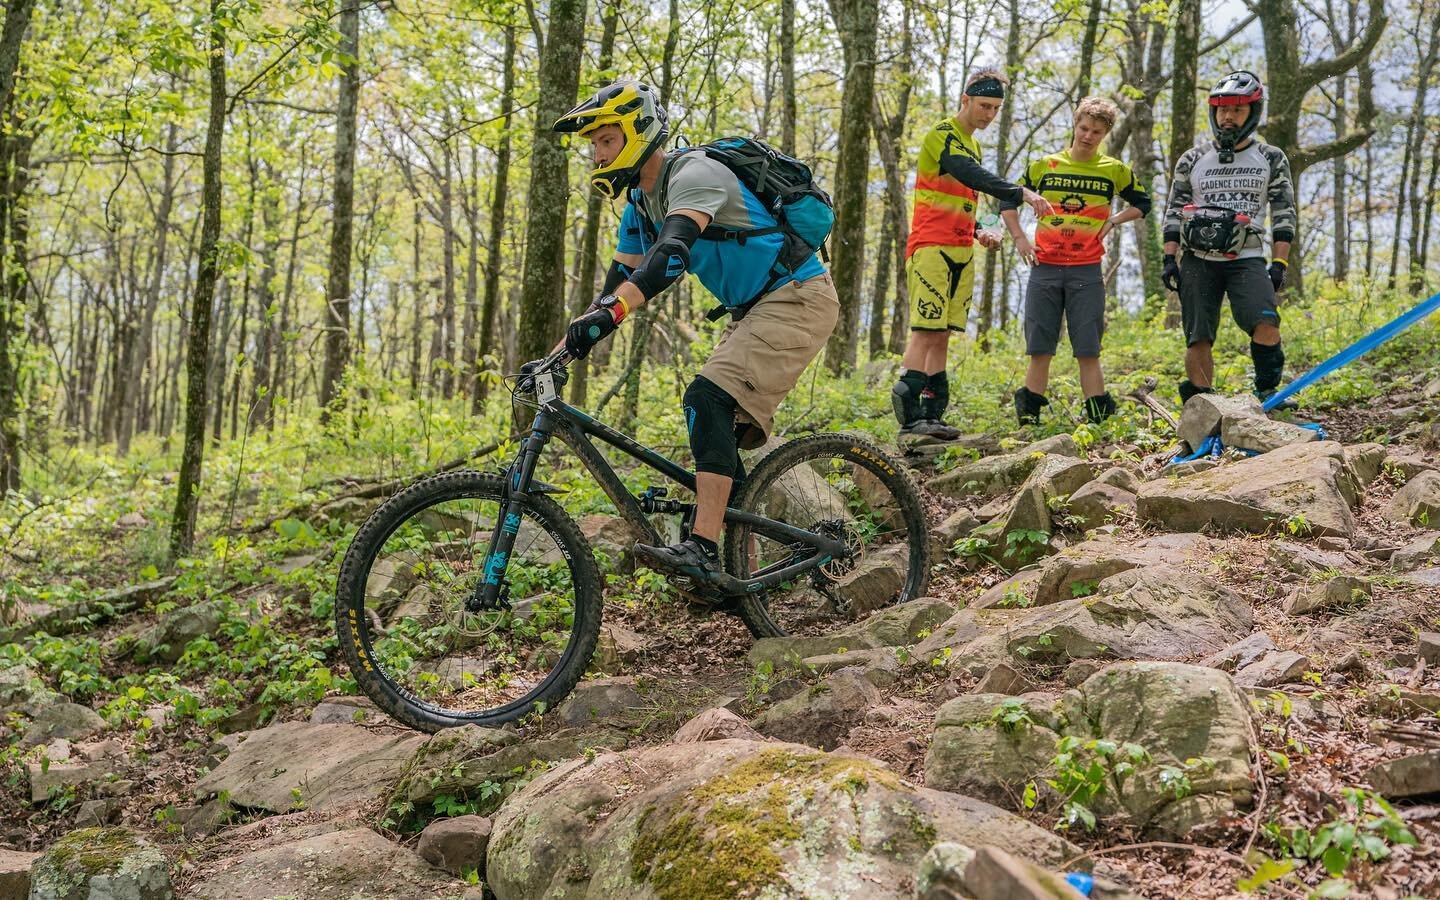 We&rsquo;re looking forward to seeing everyone at O&rsquo;Rock this week, the one race in Oklahoma and the final event of the 2021 SET 🤘🏻
&mdash;
BikeReg.com/orockepicenduro 
&mdash;
#SET #southernendurotour #orockepicenduro #oklahoma #ouachitanati